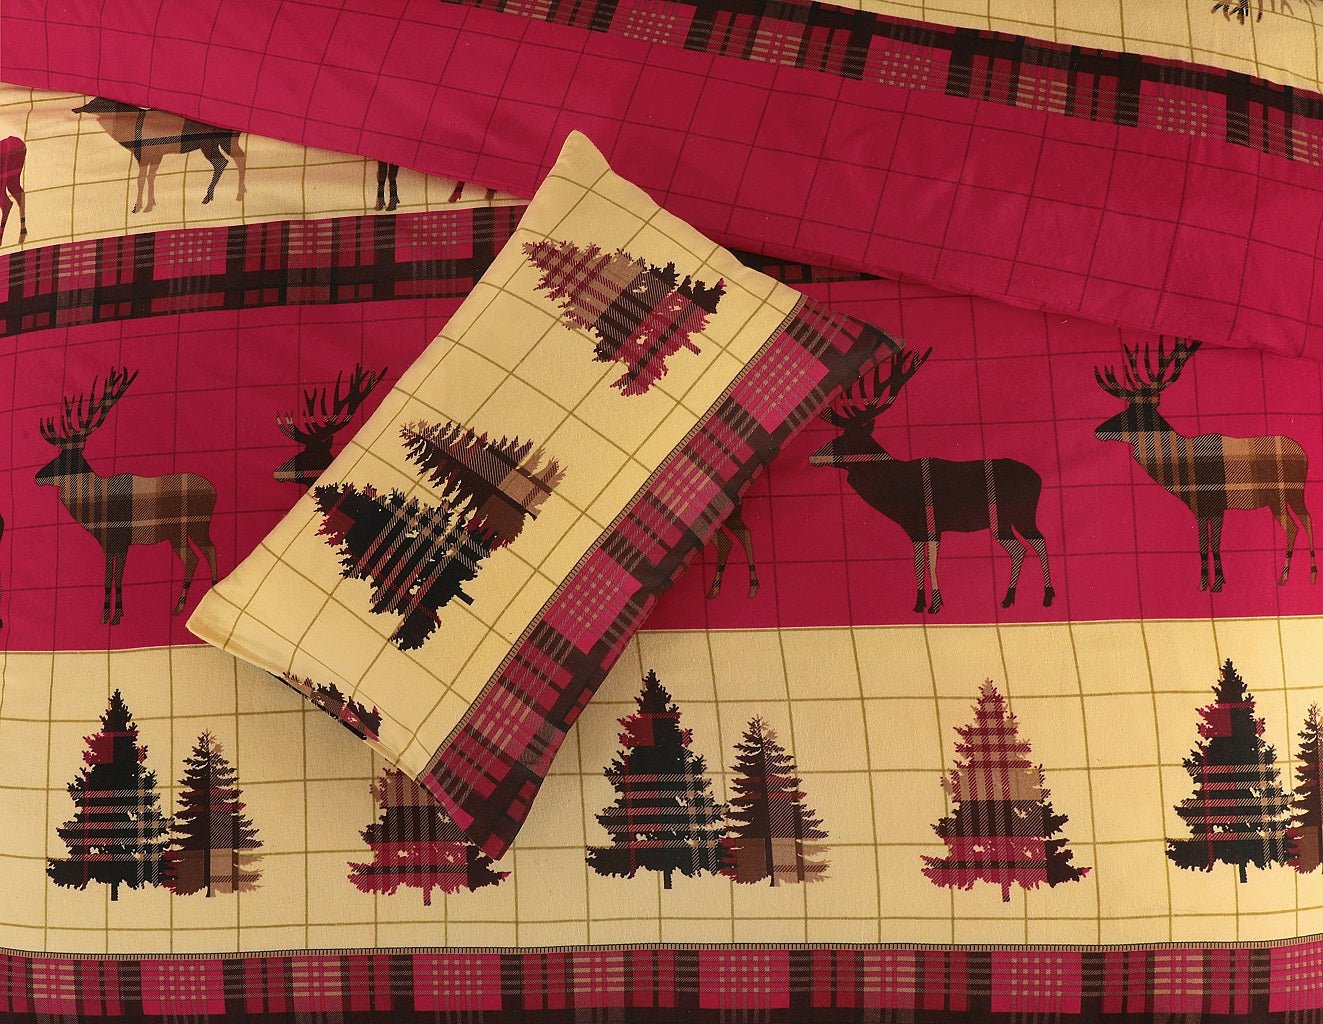 Luxury Red Flannelette Stag Duvet Cover Set - TheComfortshop.co.ukDuvet Covers0721718971924thecomfortshopTheComfortshop.co.ukred-single-stag-flannelette-duvet-coverSingleLuxury Red Flannelette Stag Duvet Cover Set - TheComfortshop.co.uk